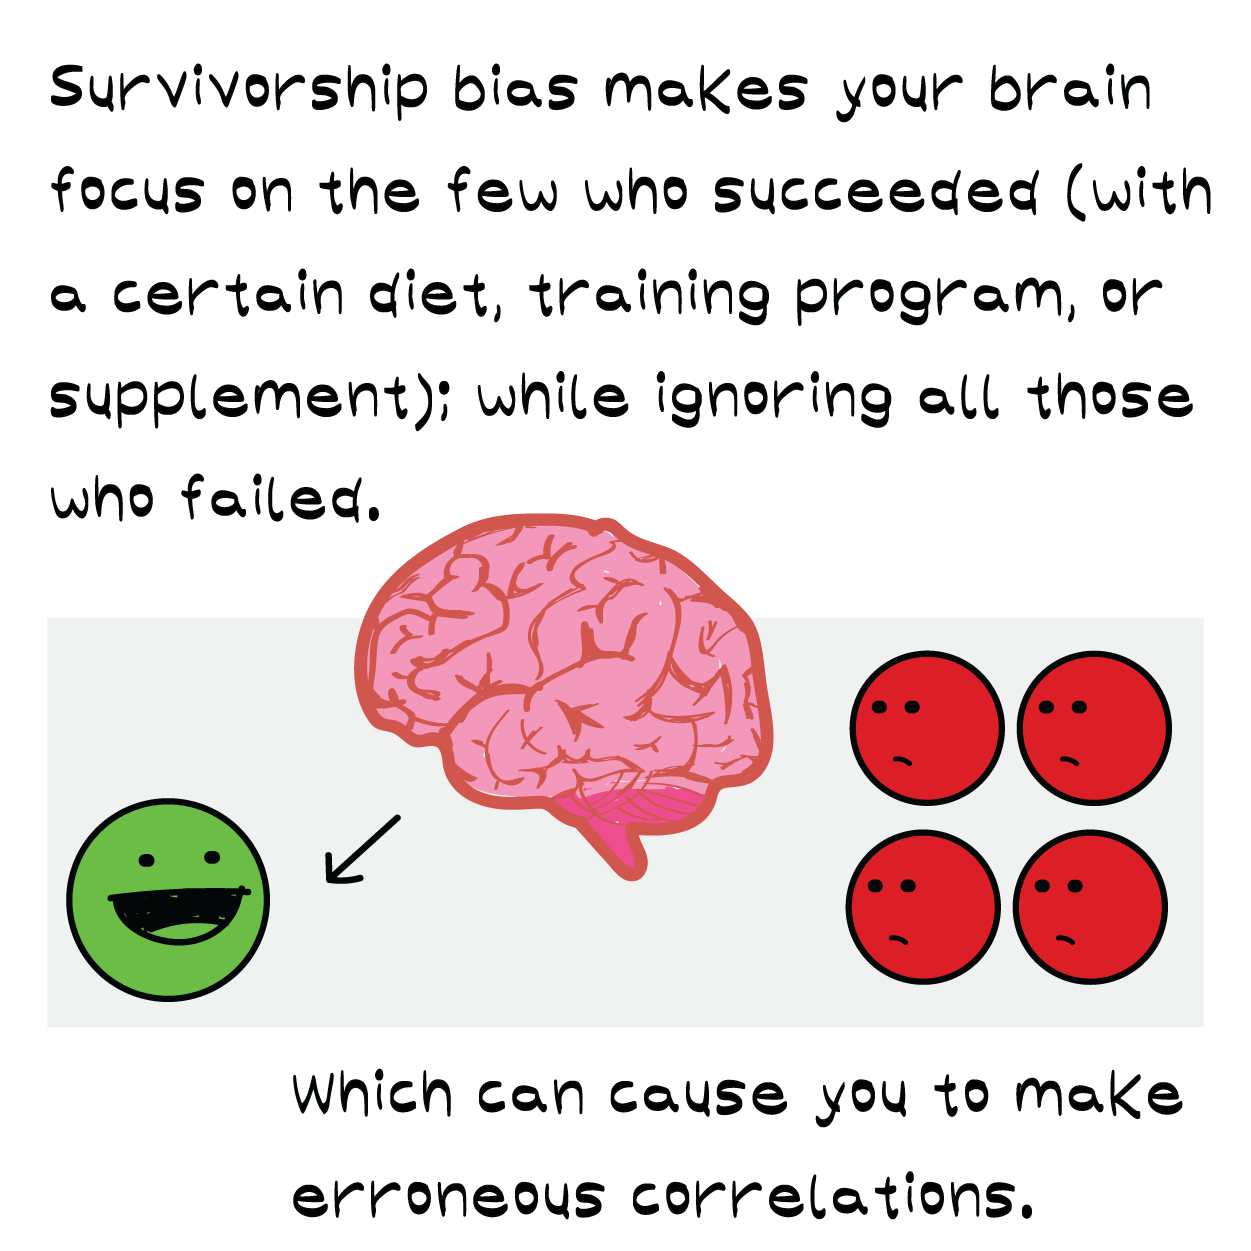 Survivorship bias - knowing your weaknesses is your biggest